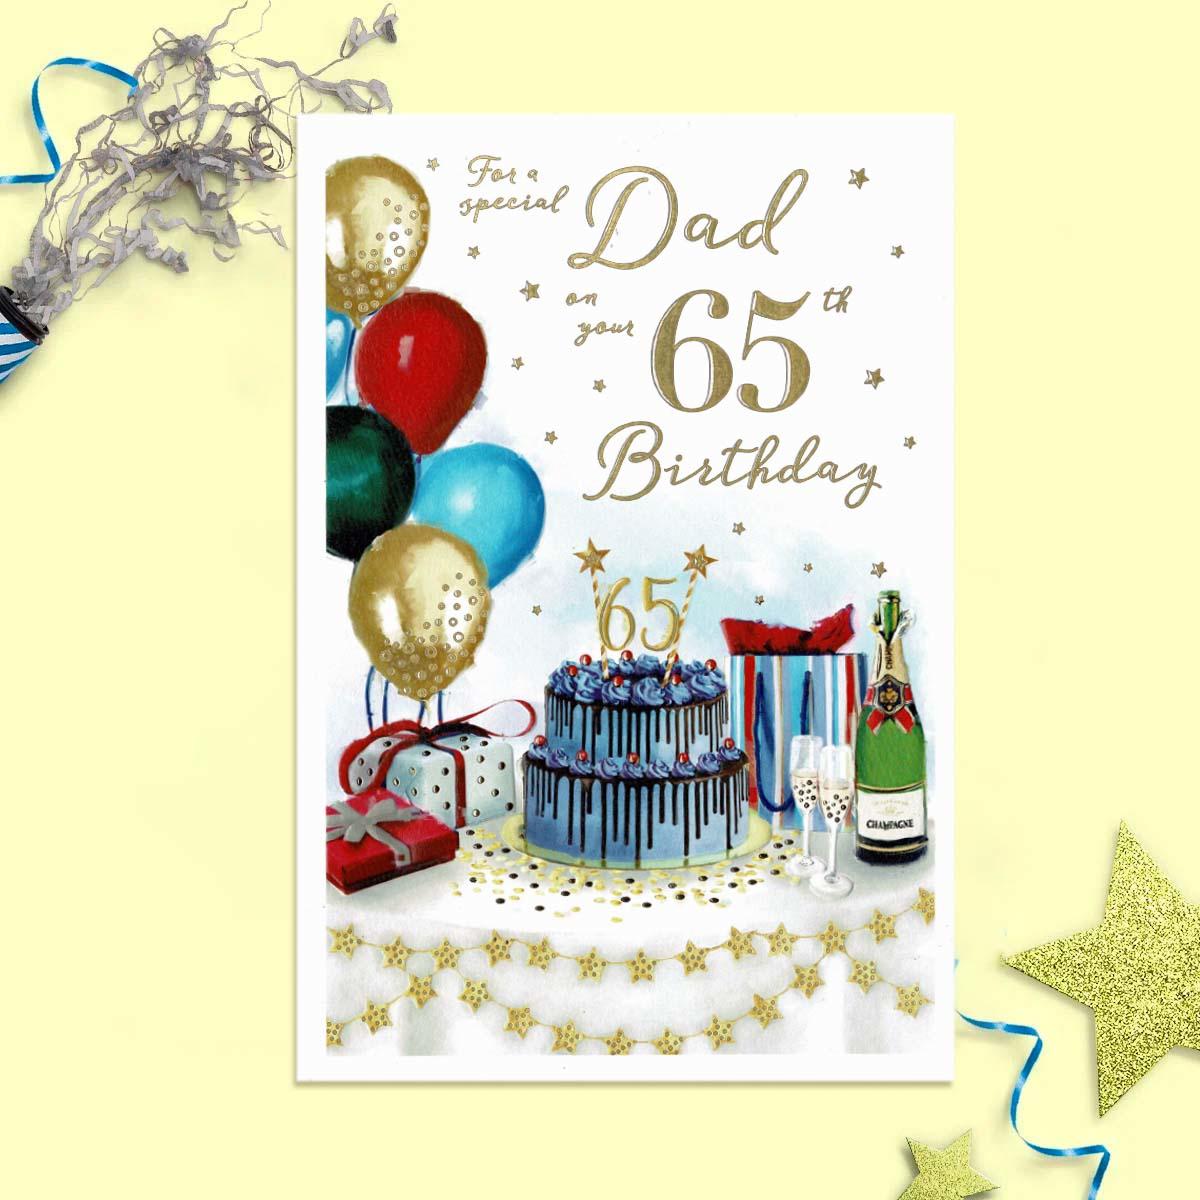 Special Dad 65th Birthday Card Front Image